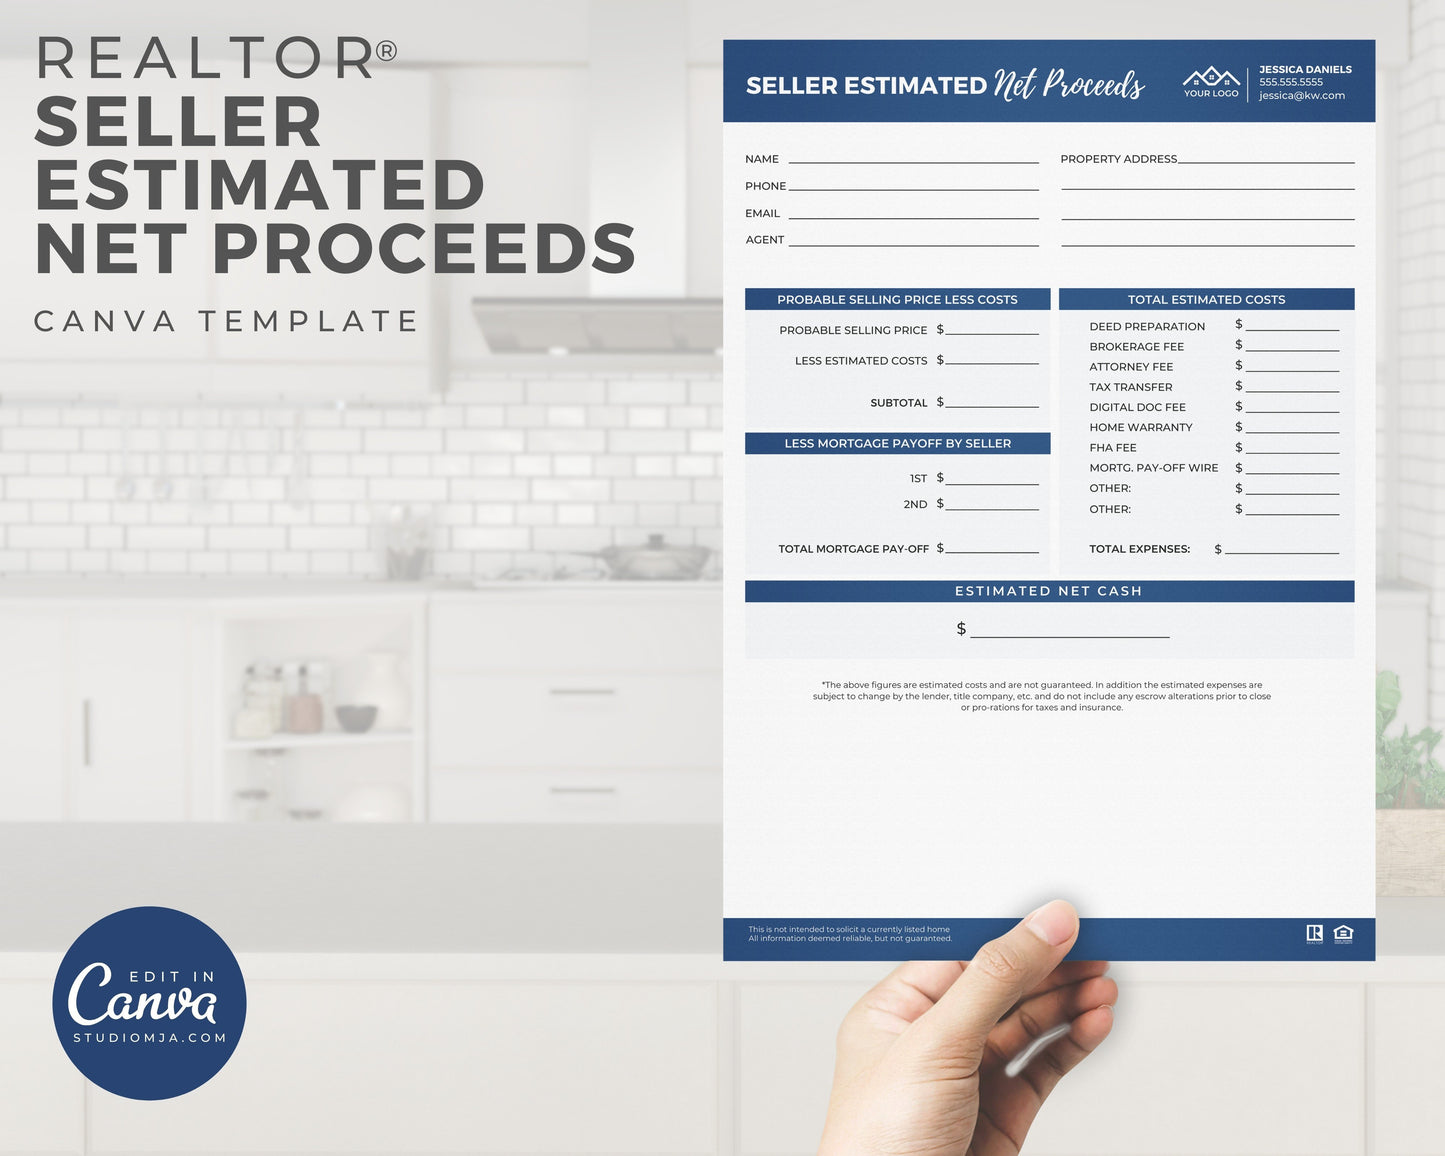 estimated net proceeds canva template for real estate agents.  A mockup featuring a blue and white form with black text and gray colored boxes.   Probable selling price less costs, total estimated costs, less mortgage payoff by seller, estimated net cash.  Hand holding vertical flyer.